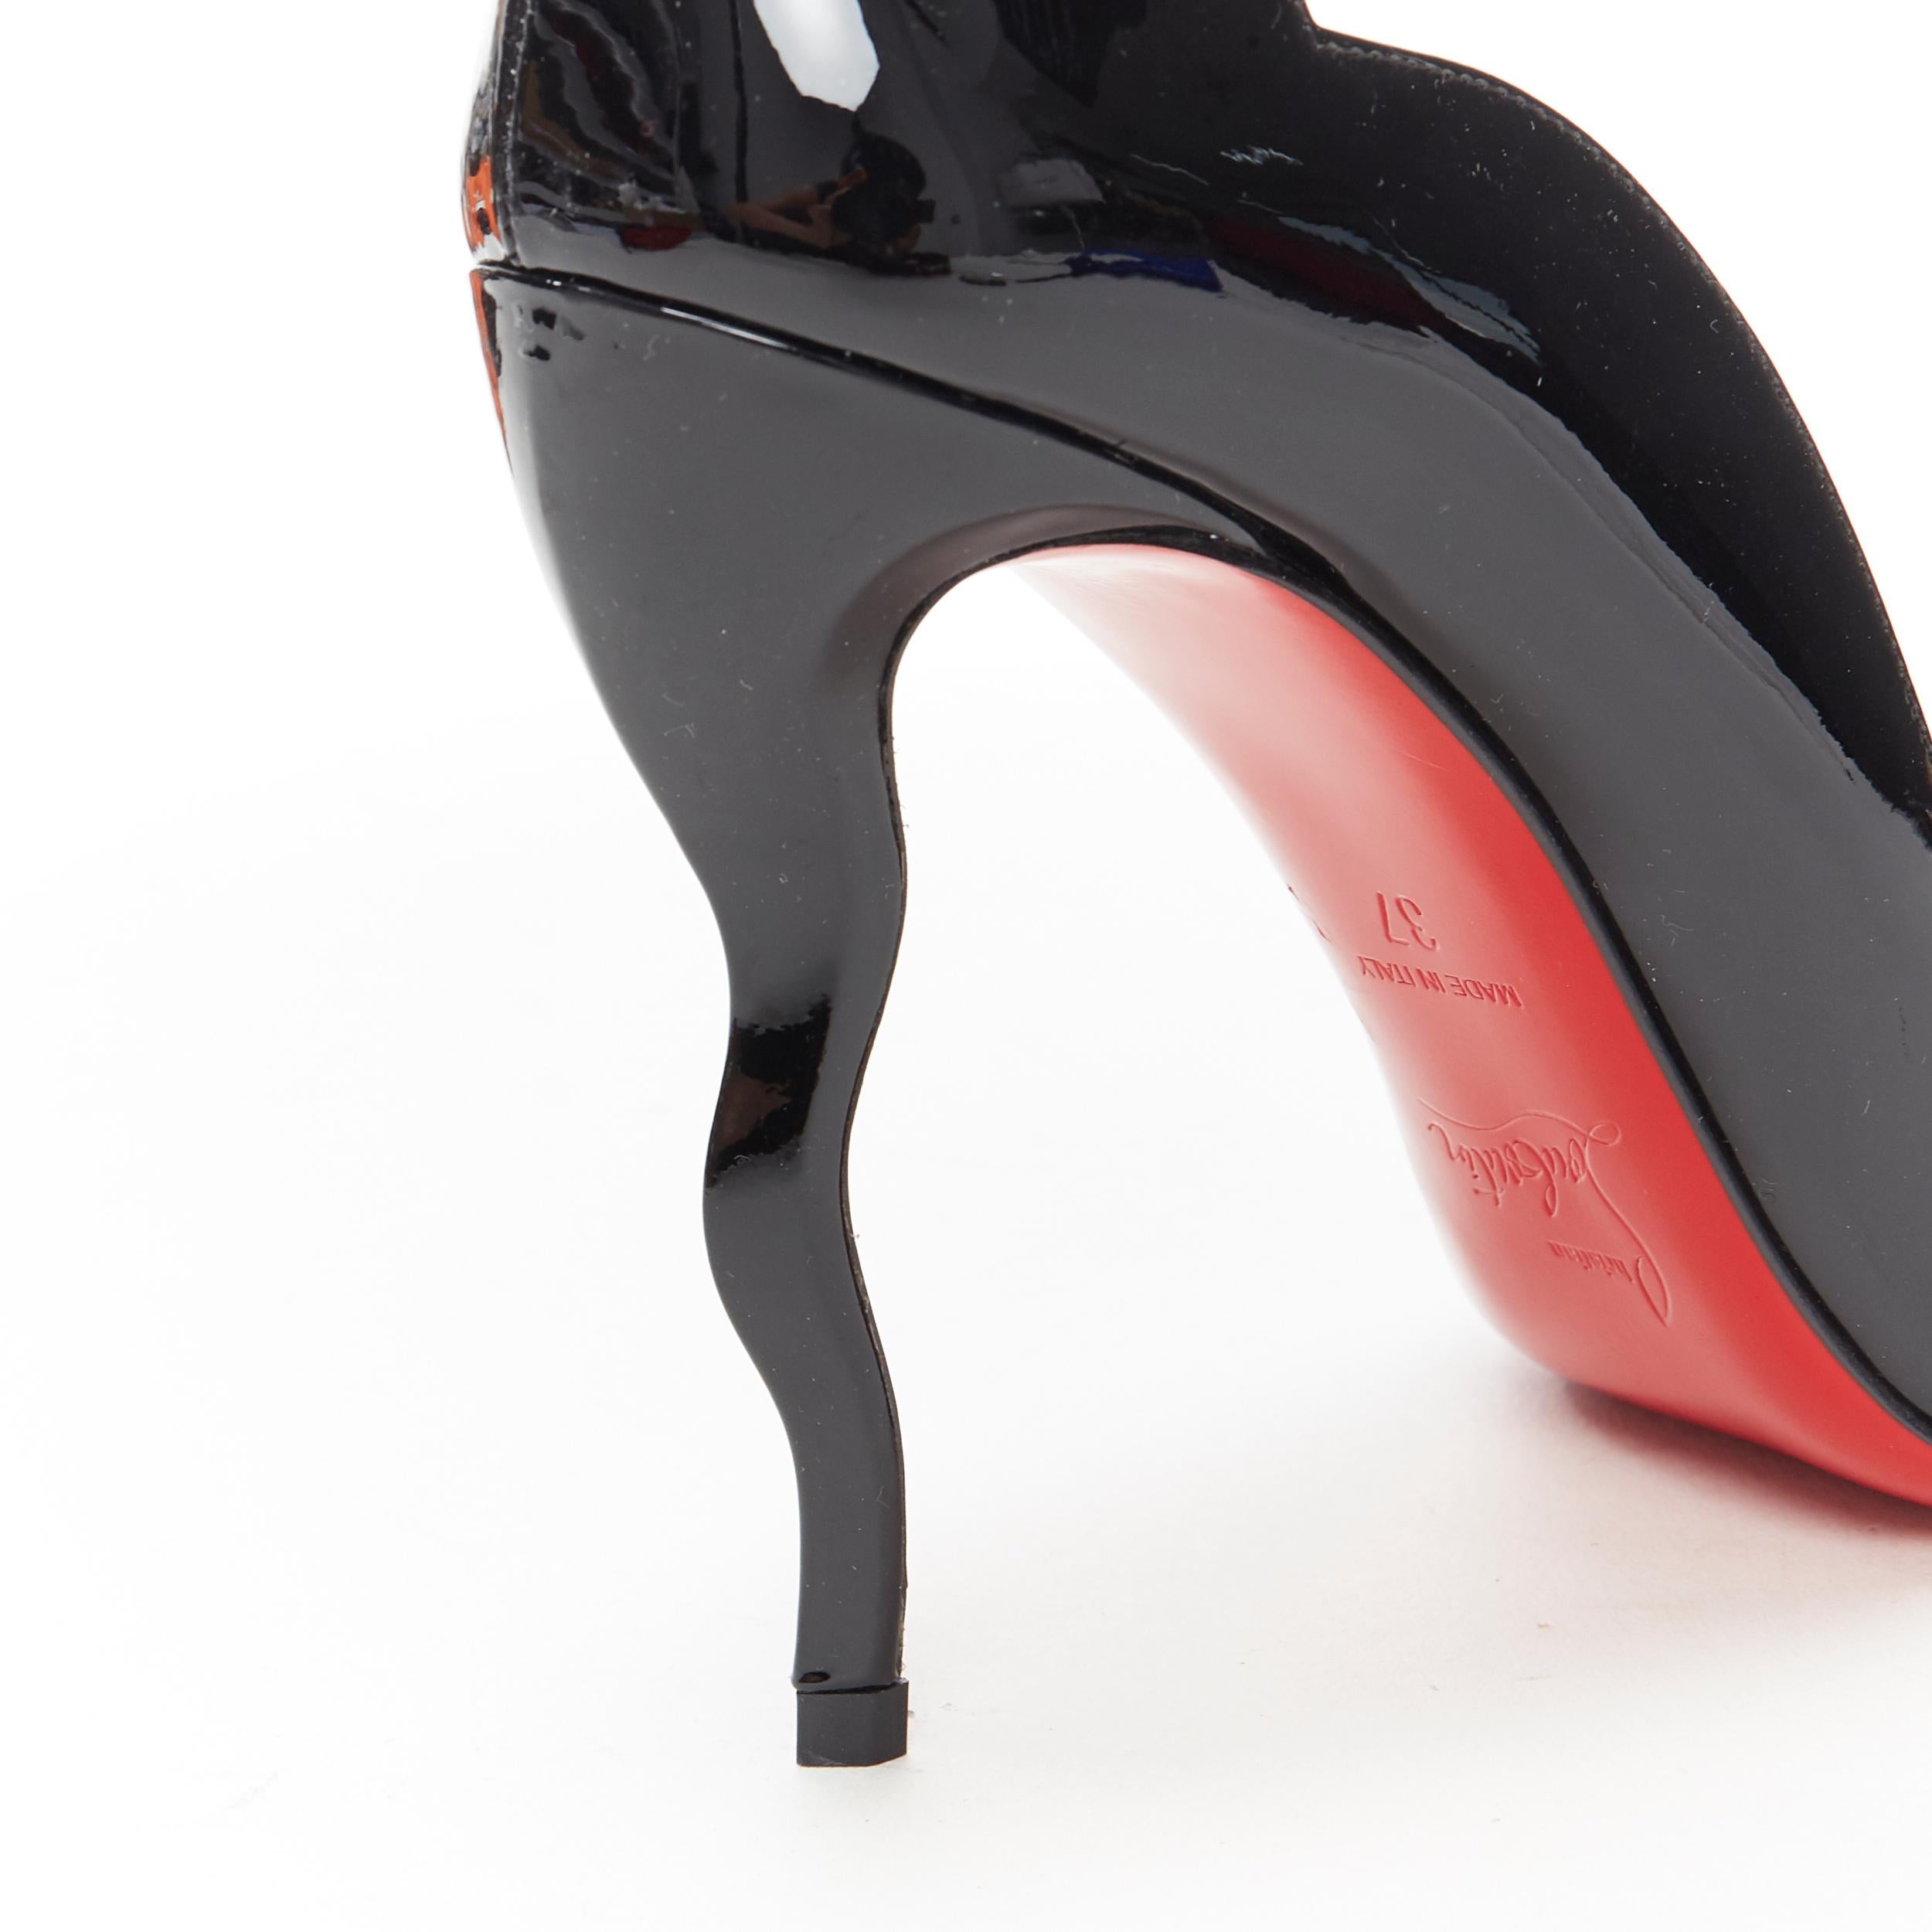 new CHRISTIAN LOUBOUTIN Wawy Dolly 100 black patent squiggly heel pump EU37 1